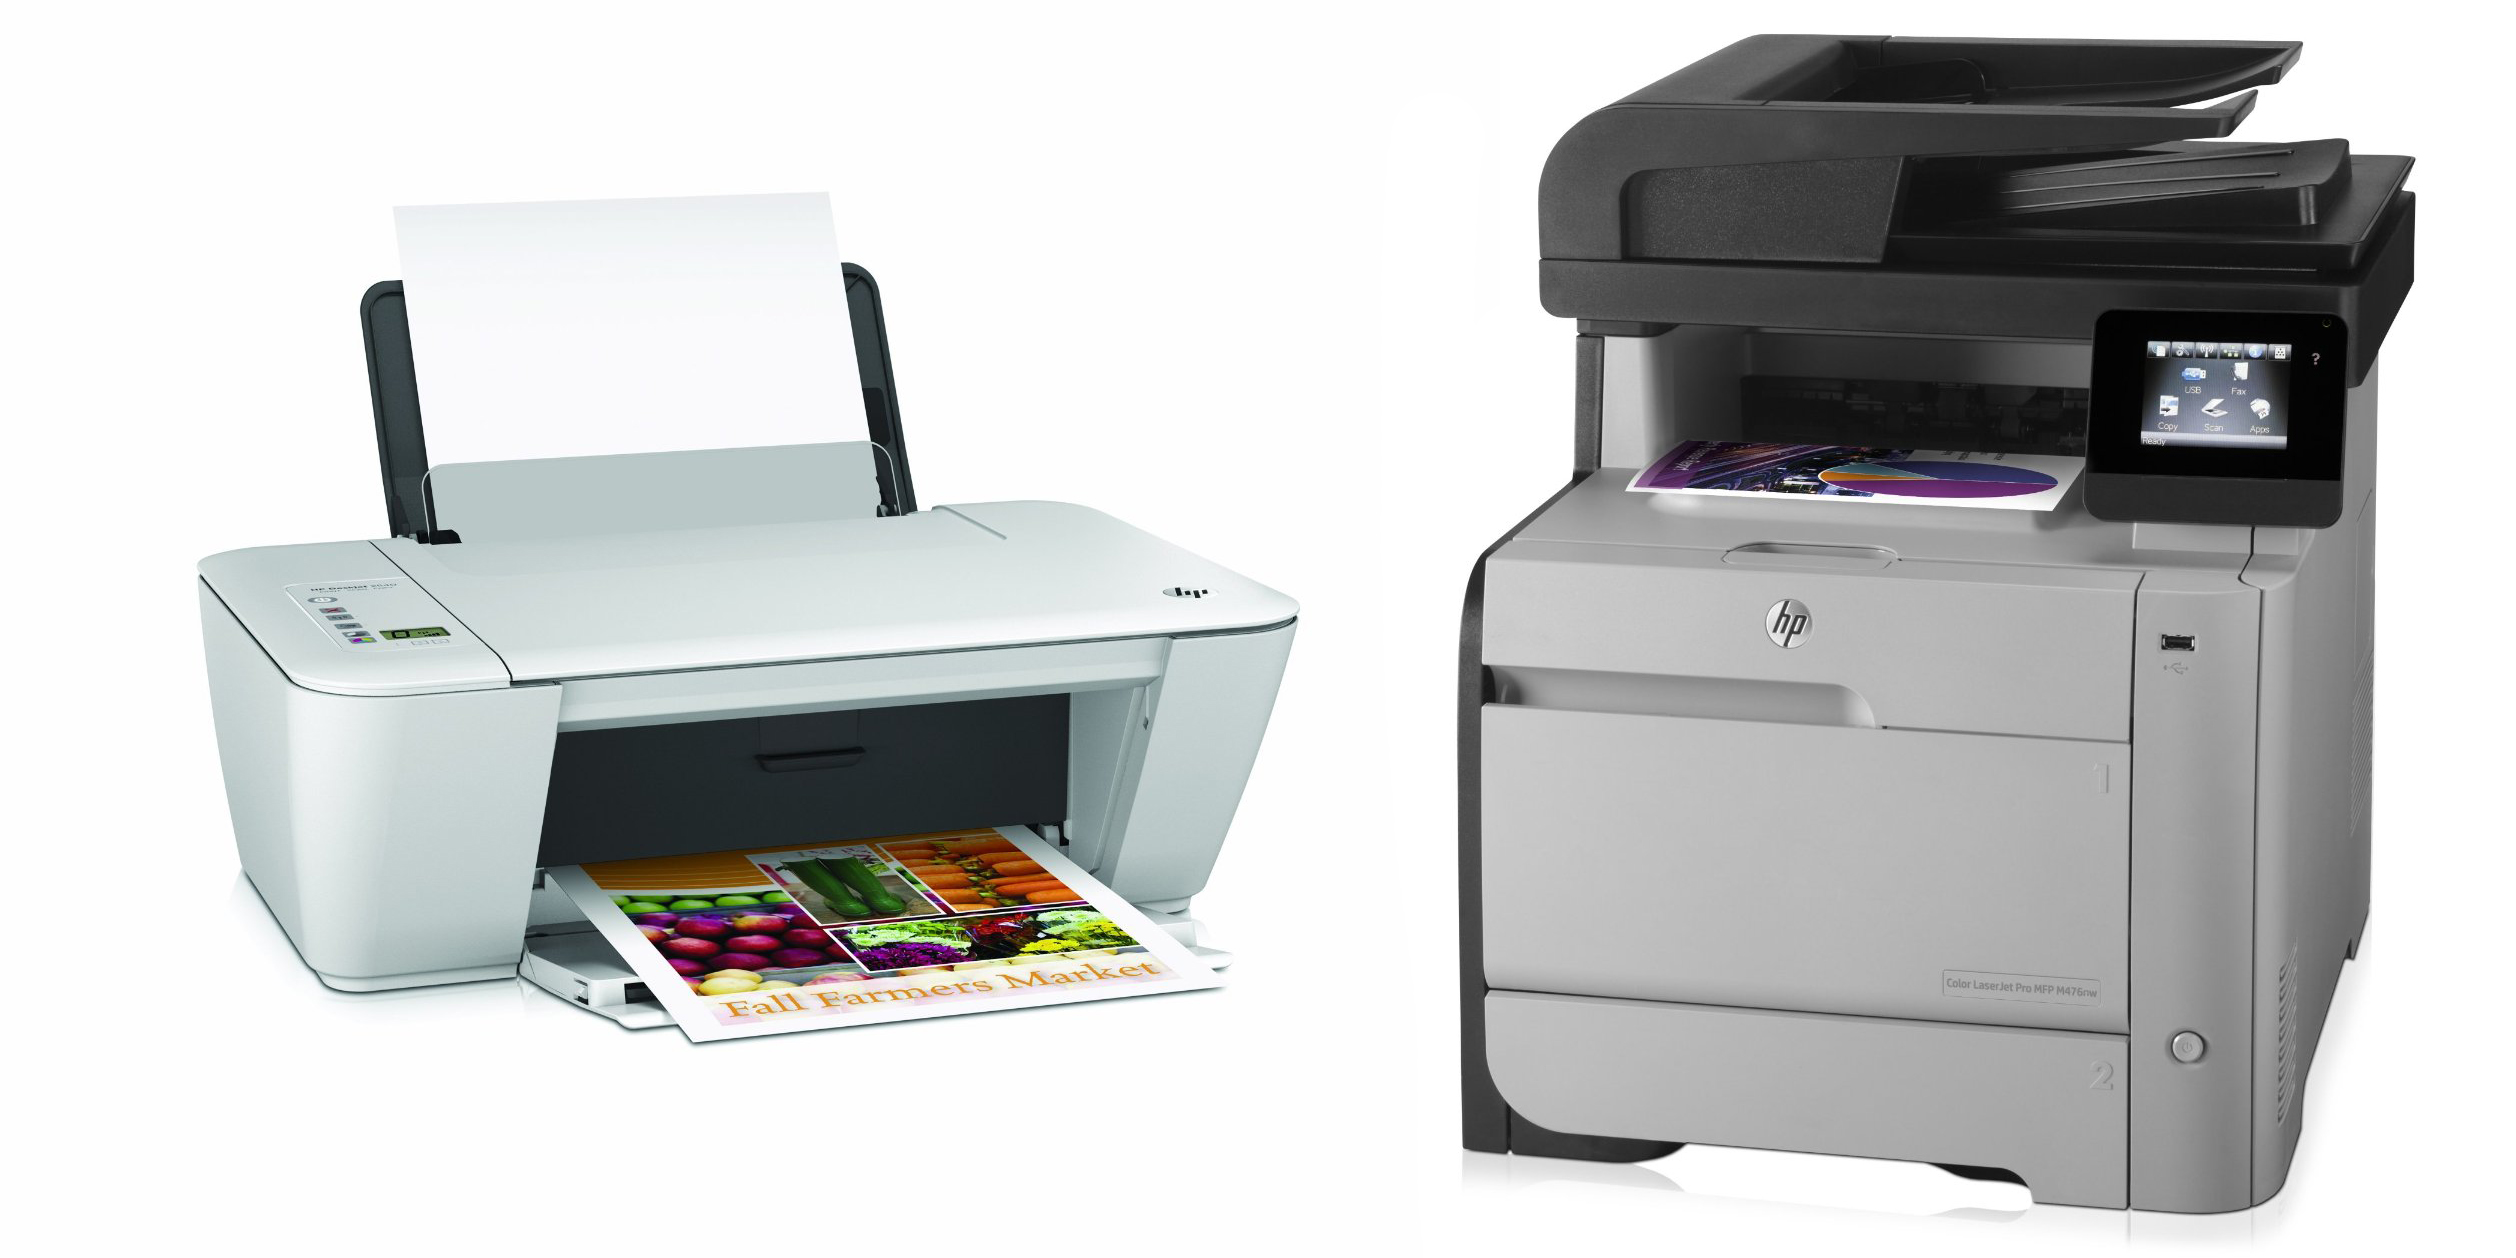 mirror image printing on hp officejet 6500 for mac